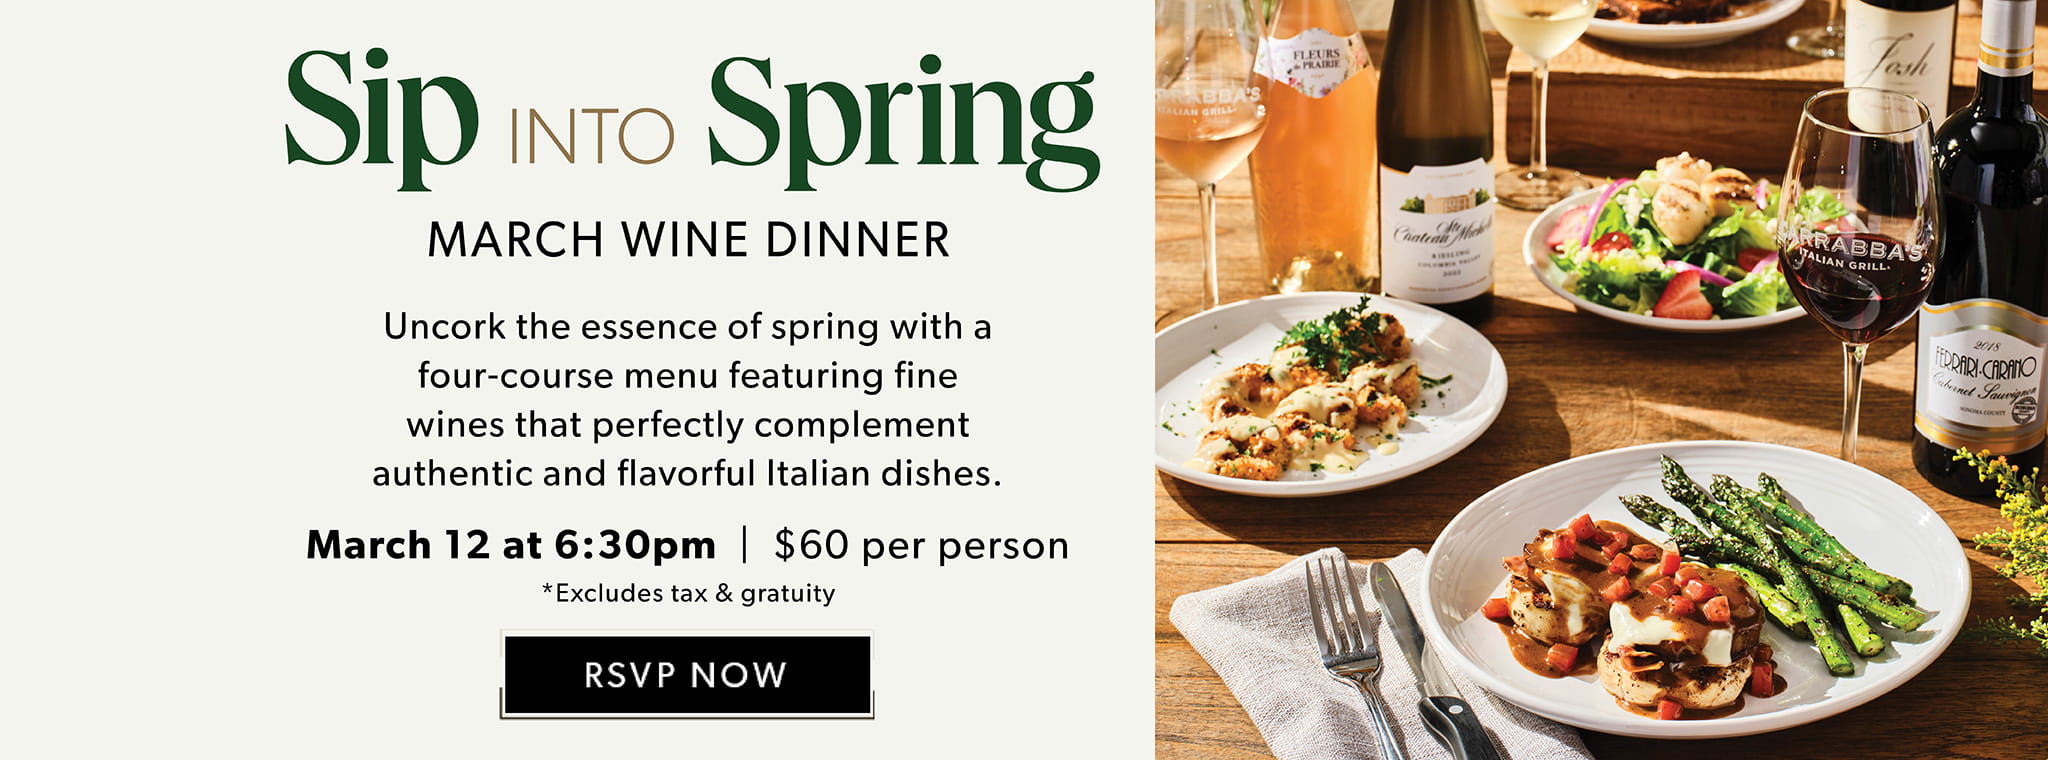 Sip Into Spring March WIne Dinner